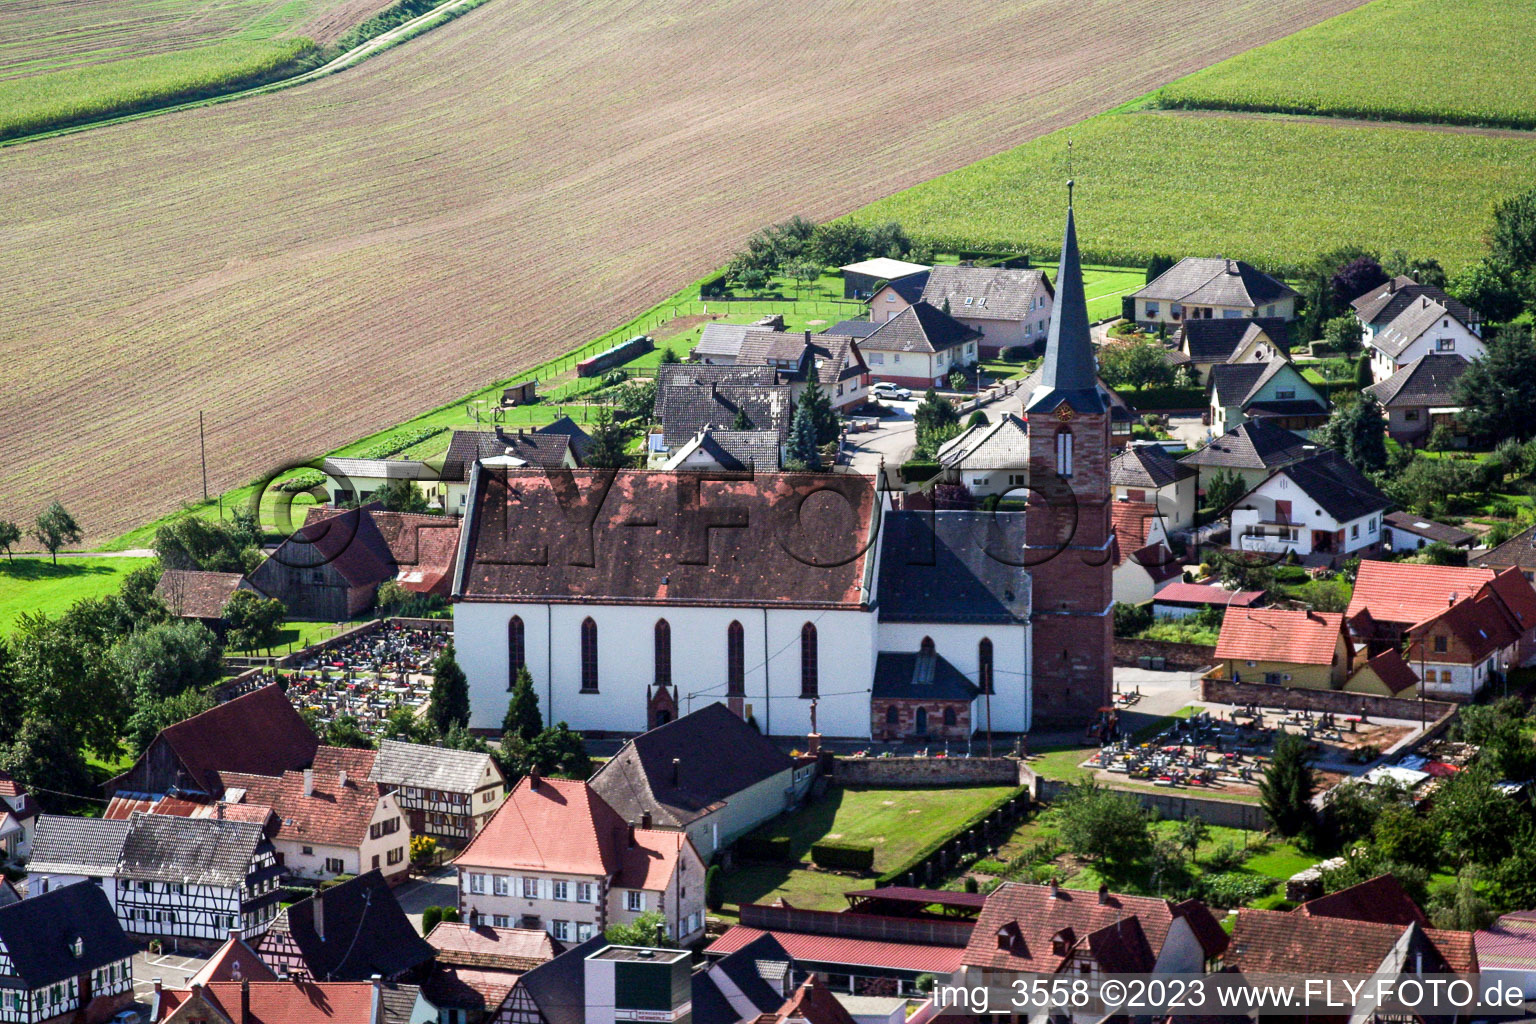 Schleithal in the state Bas-Rhin, France seen from a drone